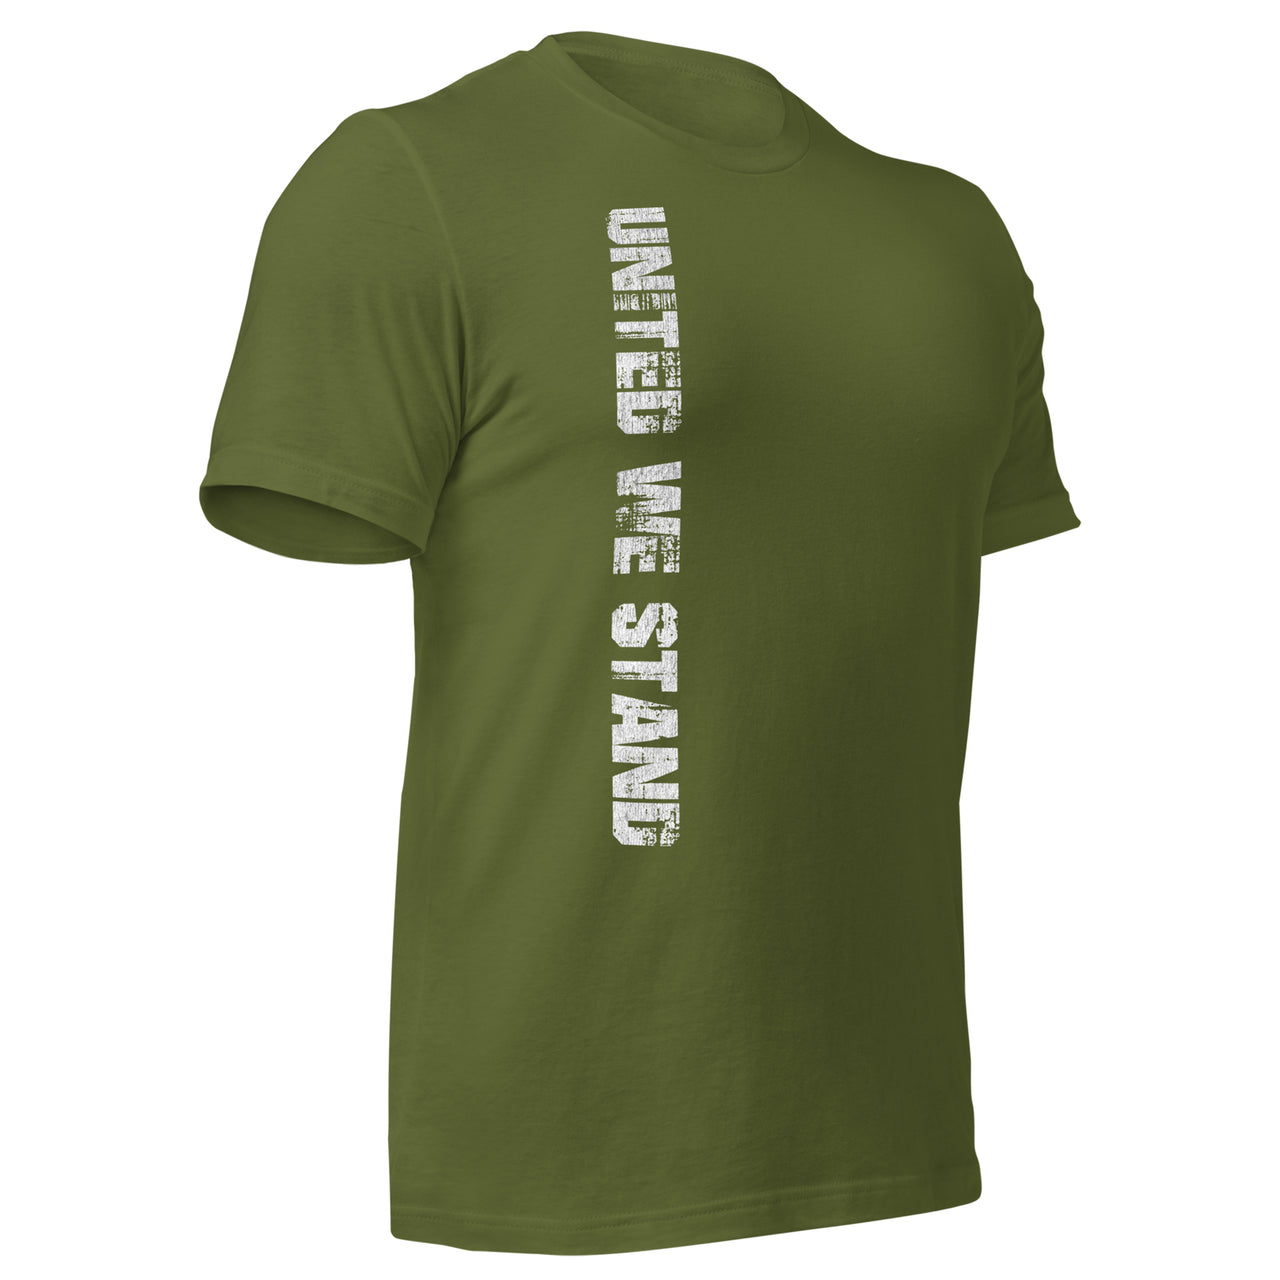 United We Stand Full Color American Flag T-Shirt in green front